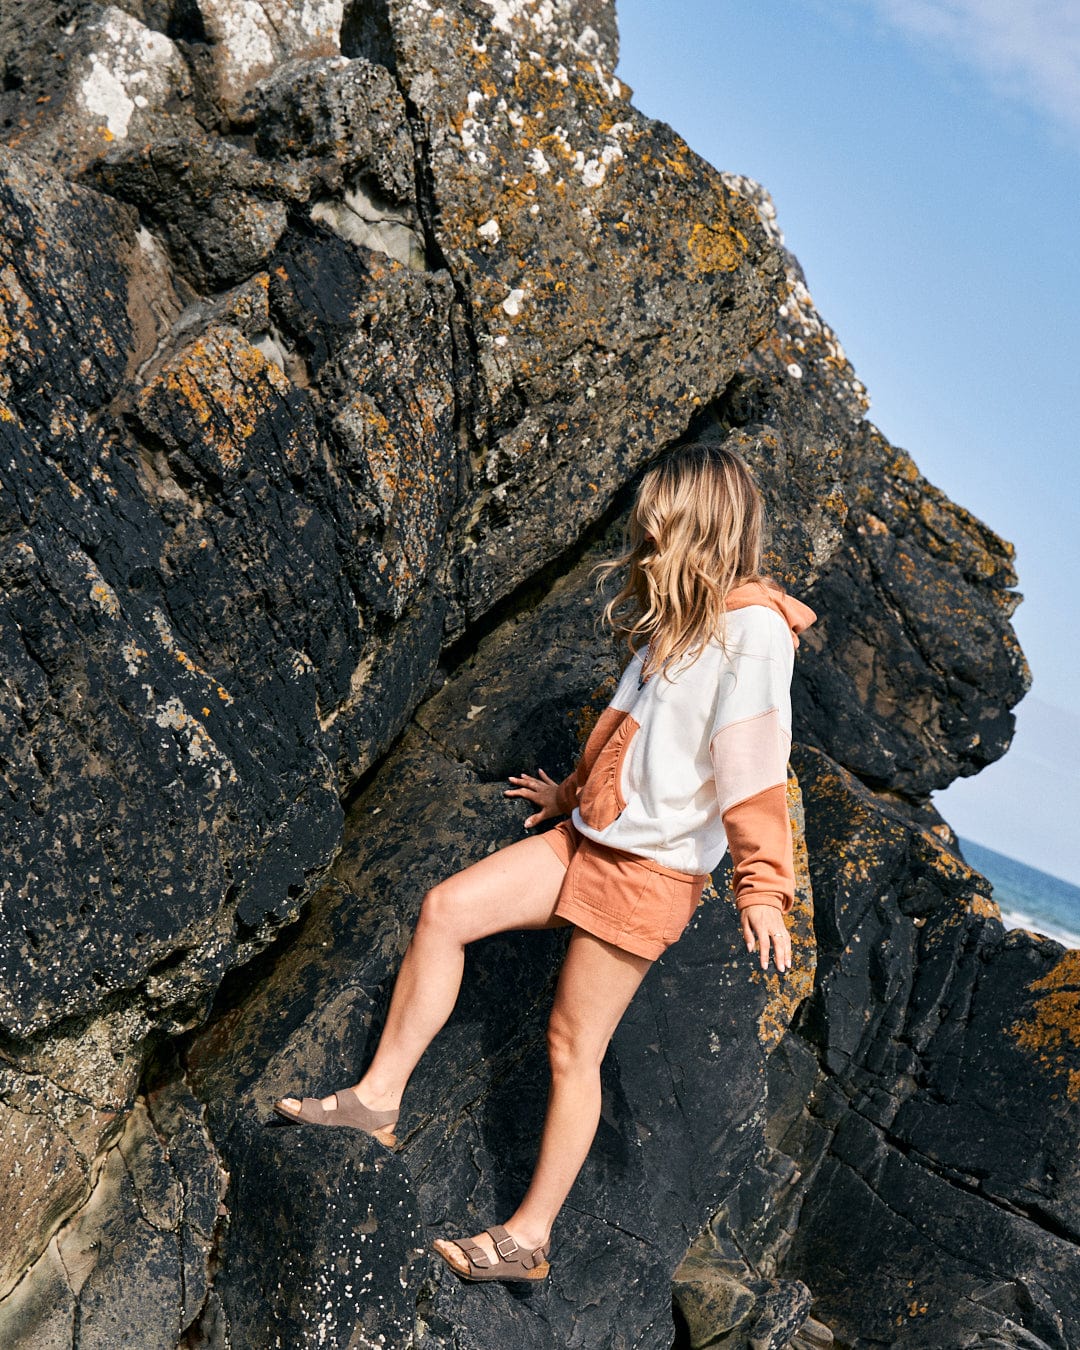 A person in a Palmera - Womens Pop Hoodie - Cream with Saltrock branding and loose-fit shorts climbs on rocky terrain, with the ocean visible in the background.